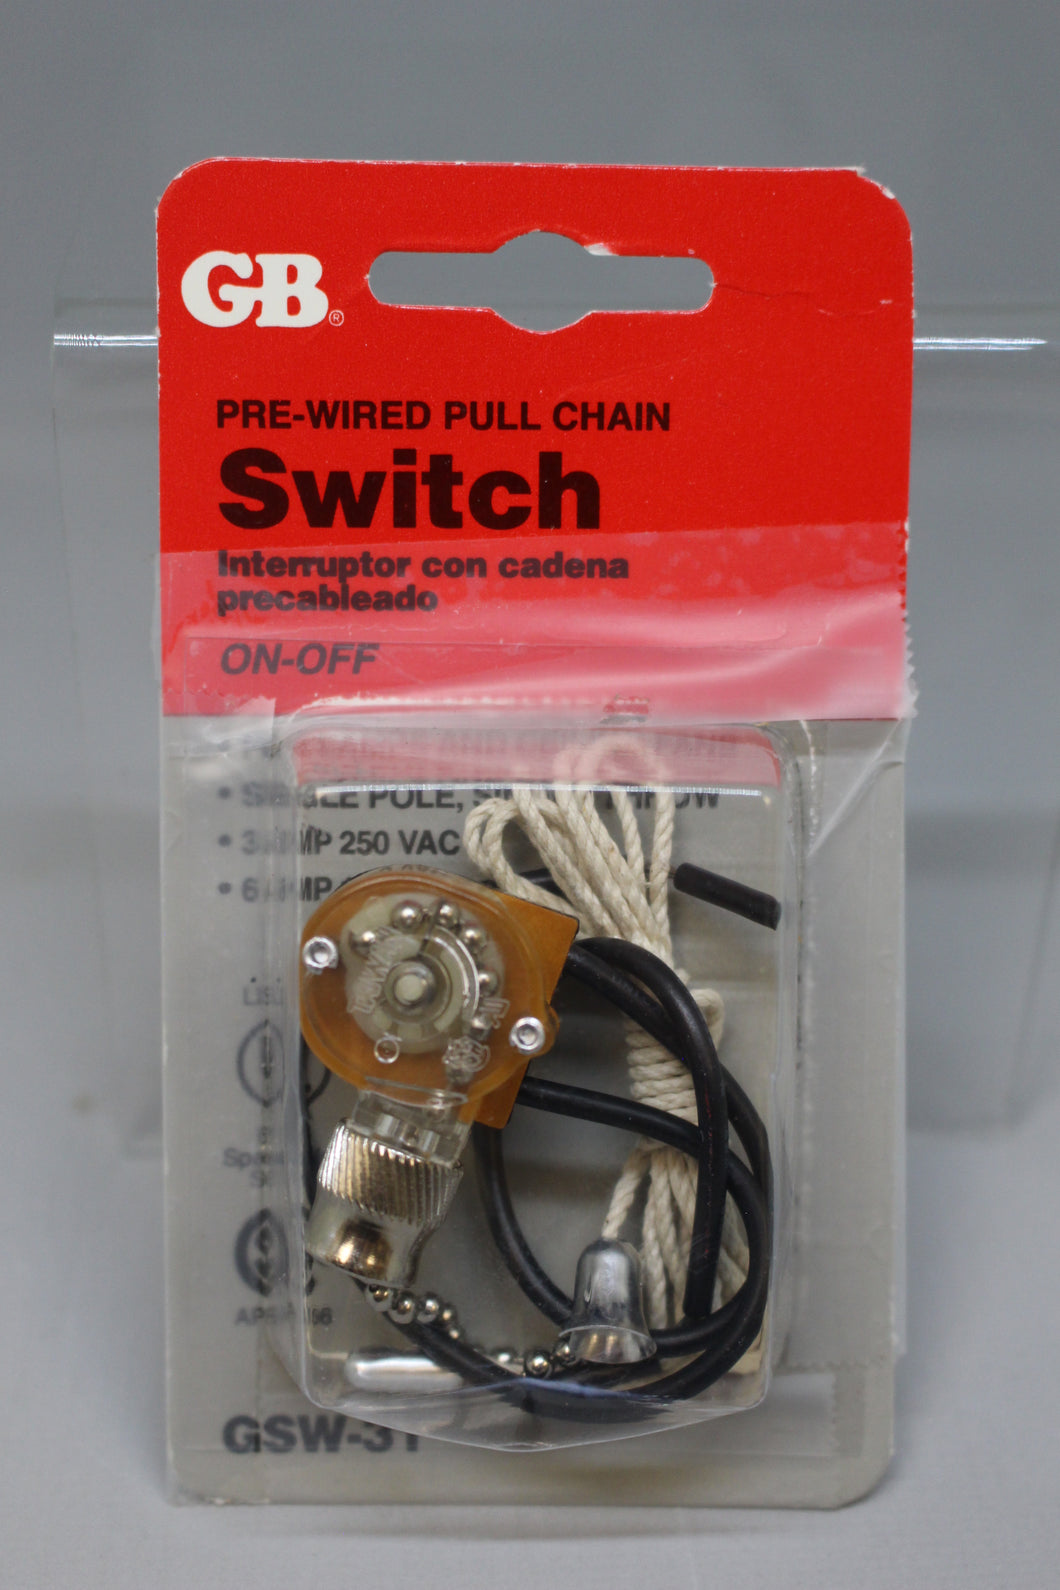 GB Pre-Wired Pull Chain On Off Switch - Single Pole - GSW-31 - New